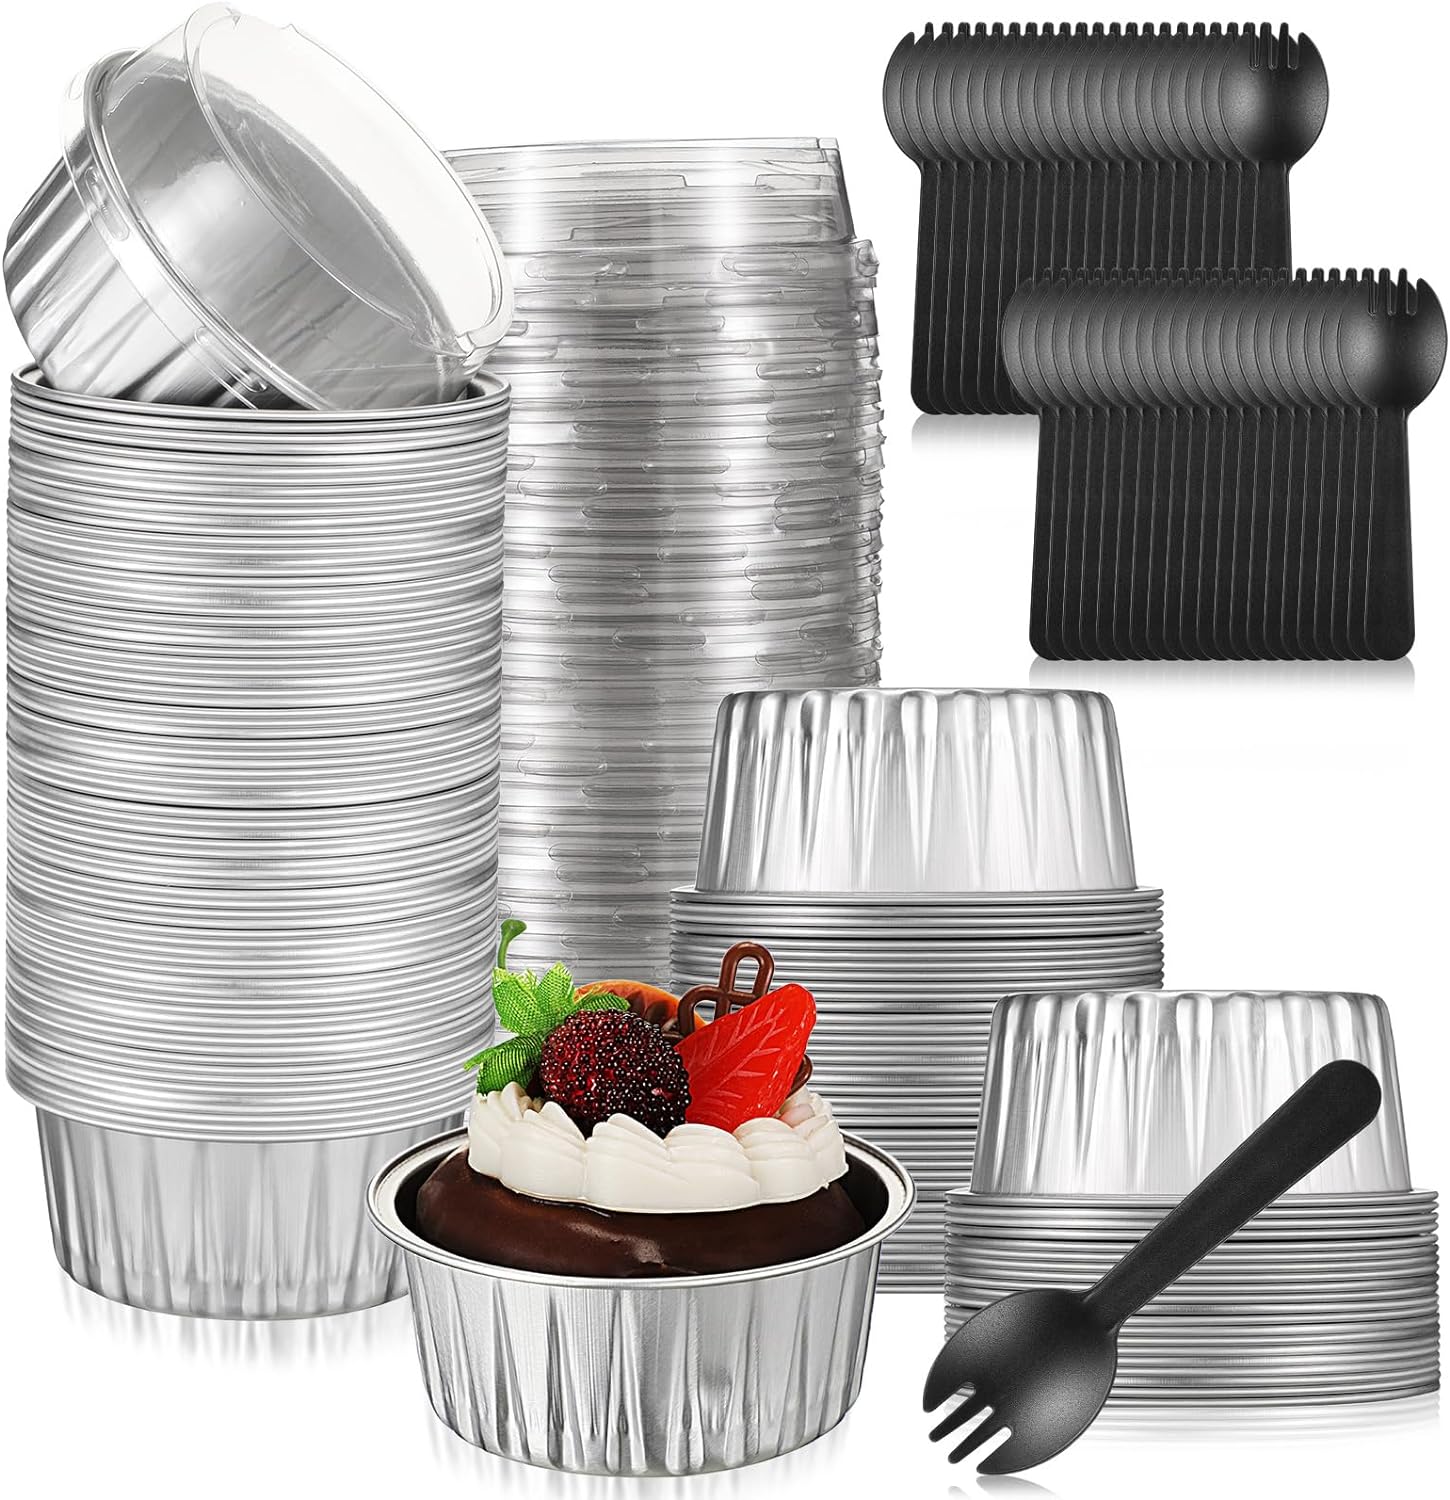 Umigy 100 Pack Cupcake Liners with Lids 5oz Aluminum Foil Cupcake Cups Muffin Tins Silver Baking Cups Cupcake Wrappers Holders with Spoons for Individual Bakery Picnic Wedding Birthday Party